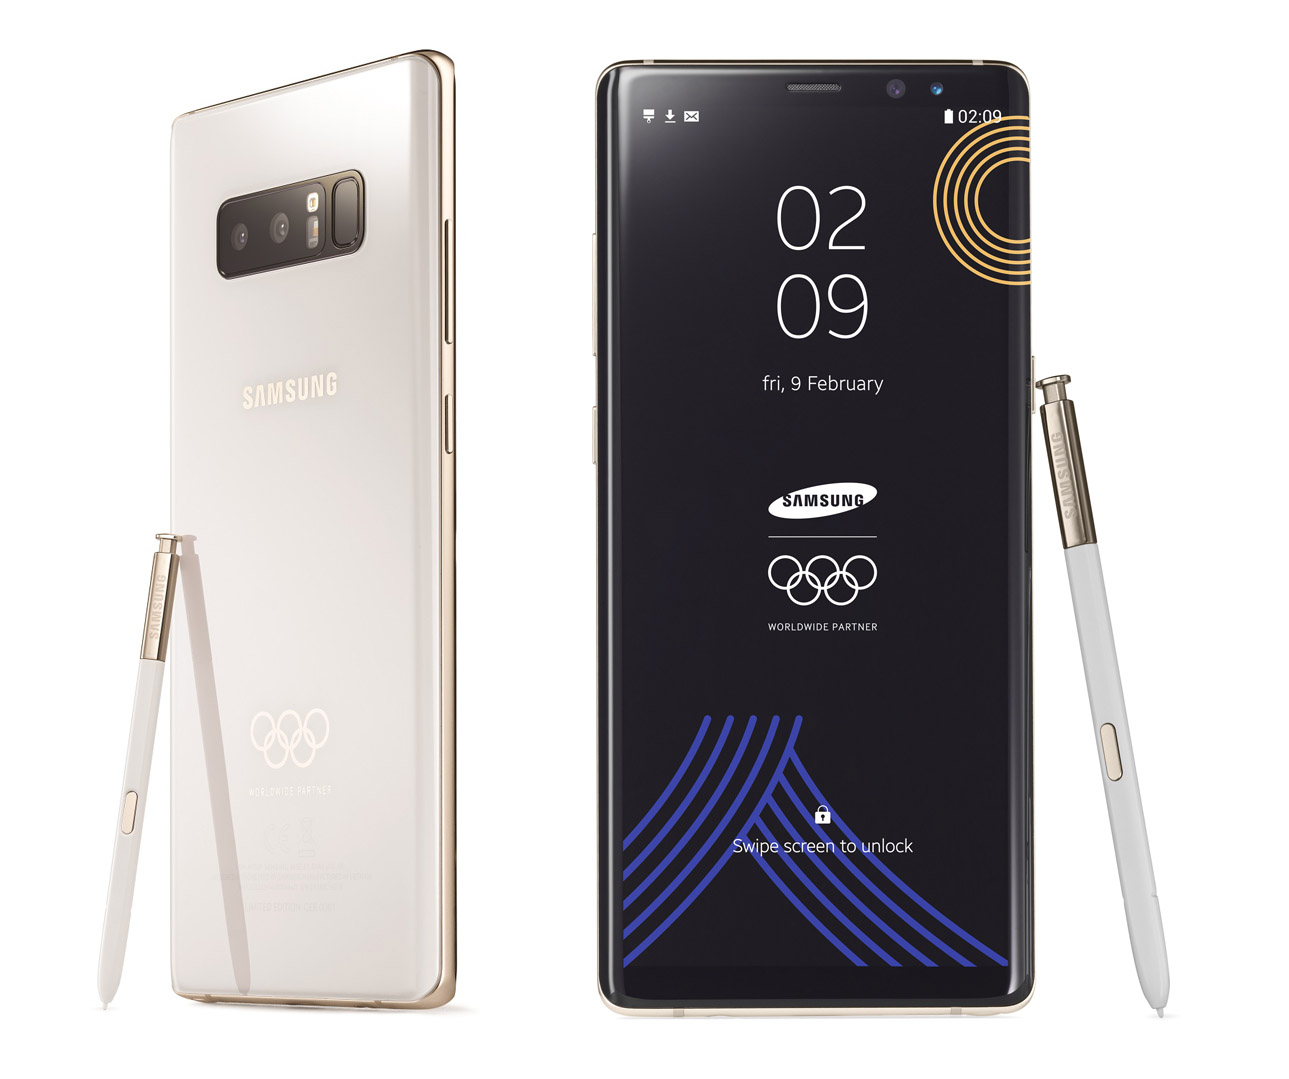 PyeongChang 2018 Olympic Games Limited Edition